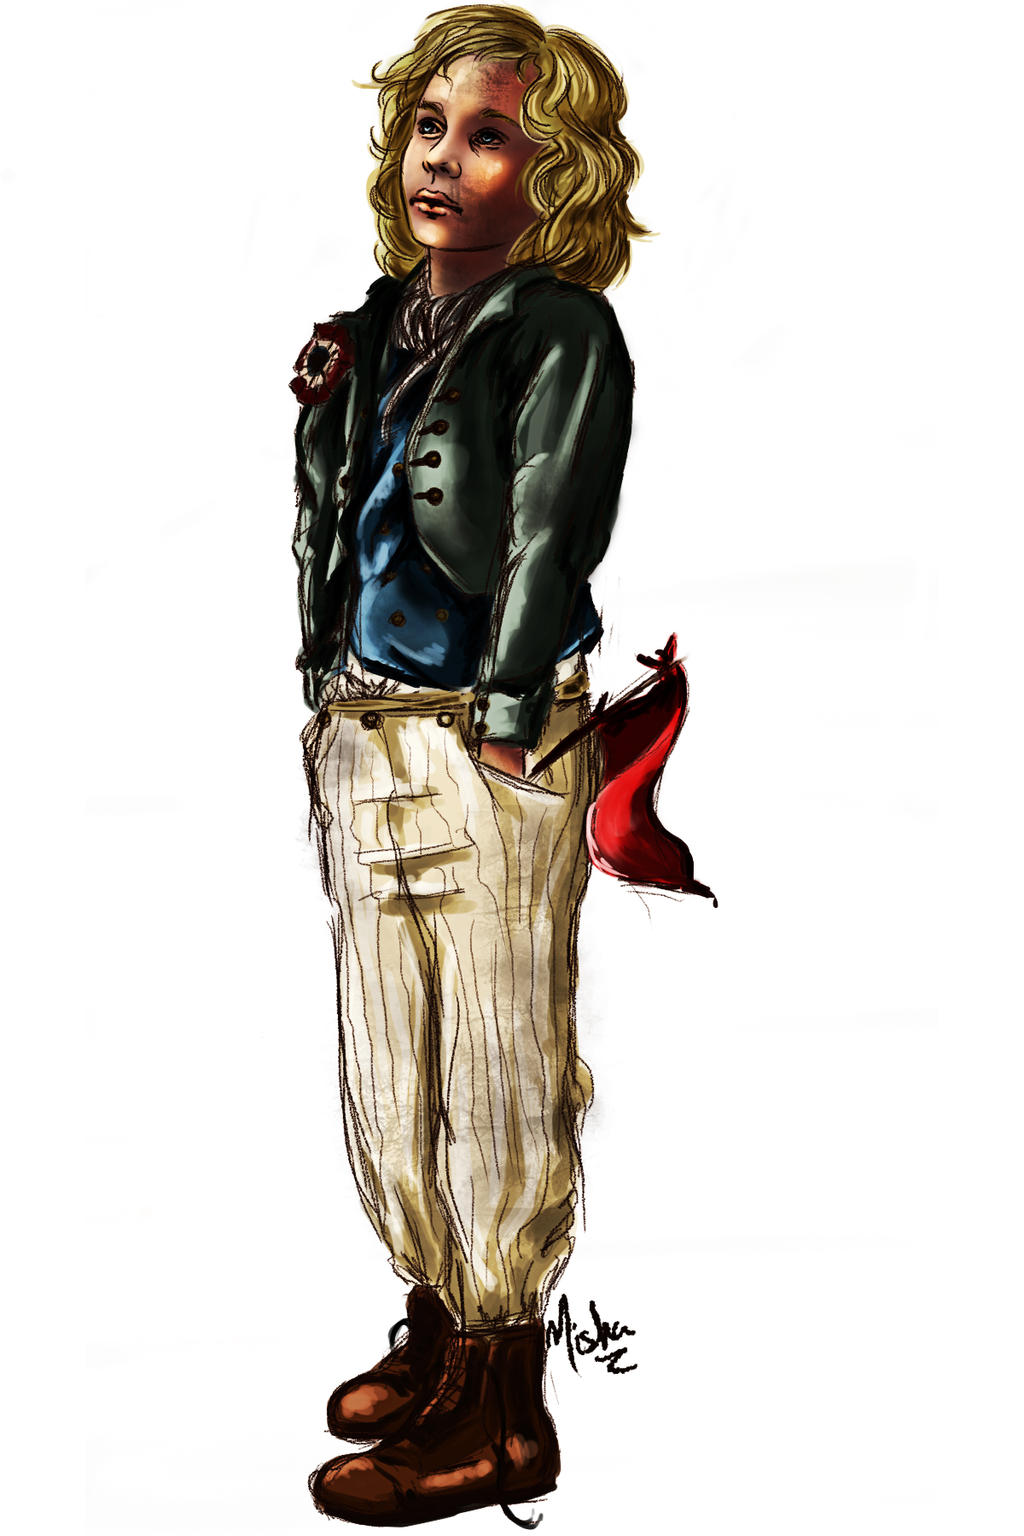 Les Mis extended petition: Gavroche